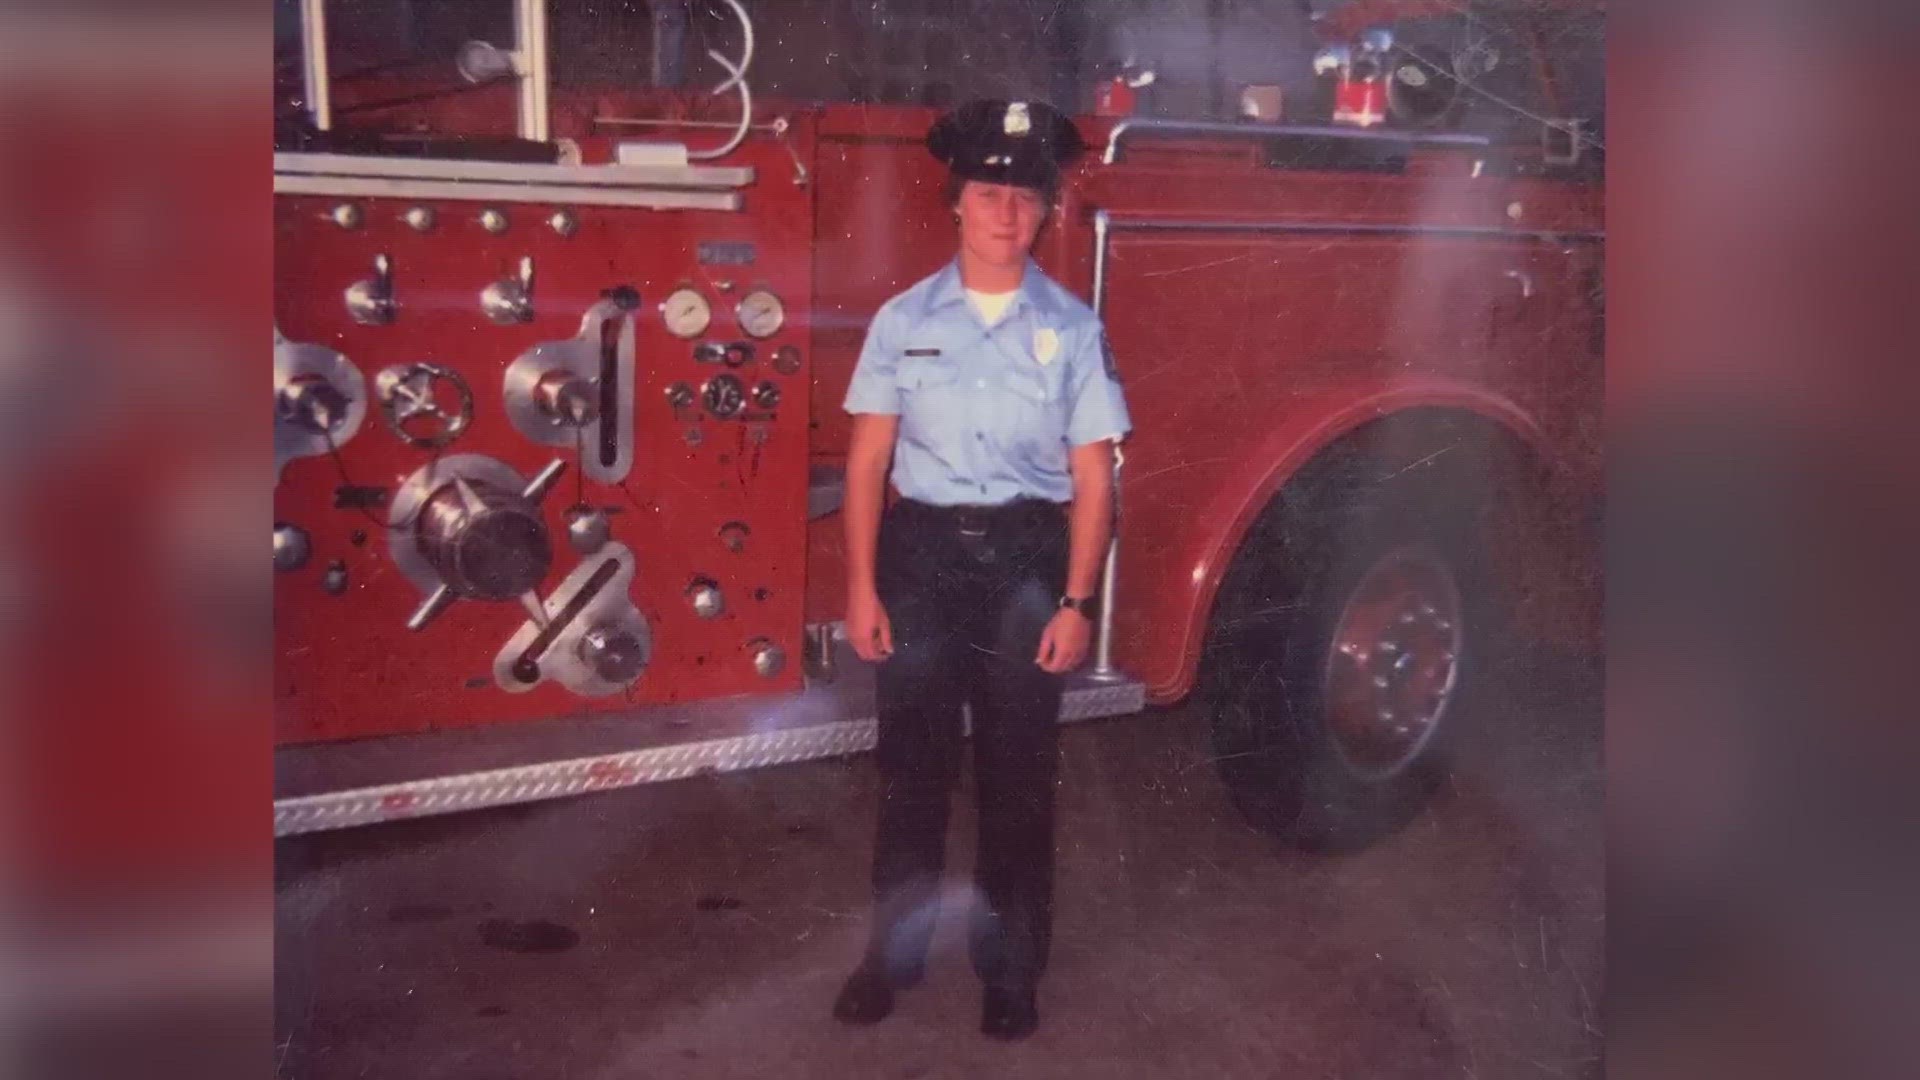 Assistant Chief Kim Iannucci is the longest-serving and highest-ranked female firefighter in the Sacramento Fire Department.